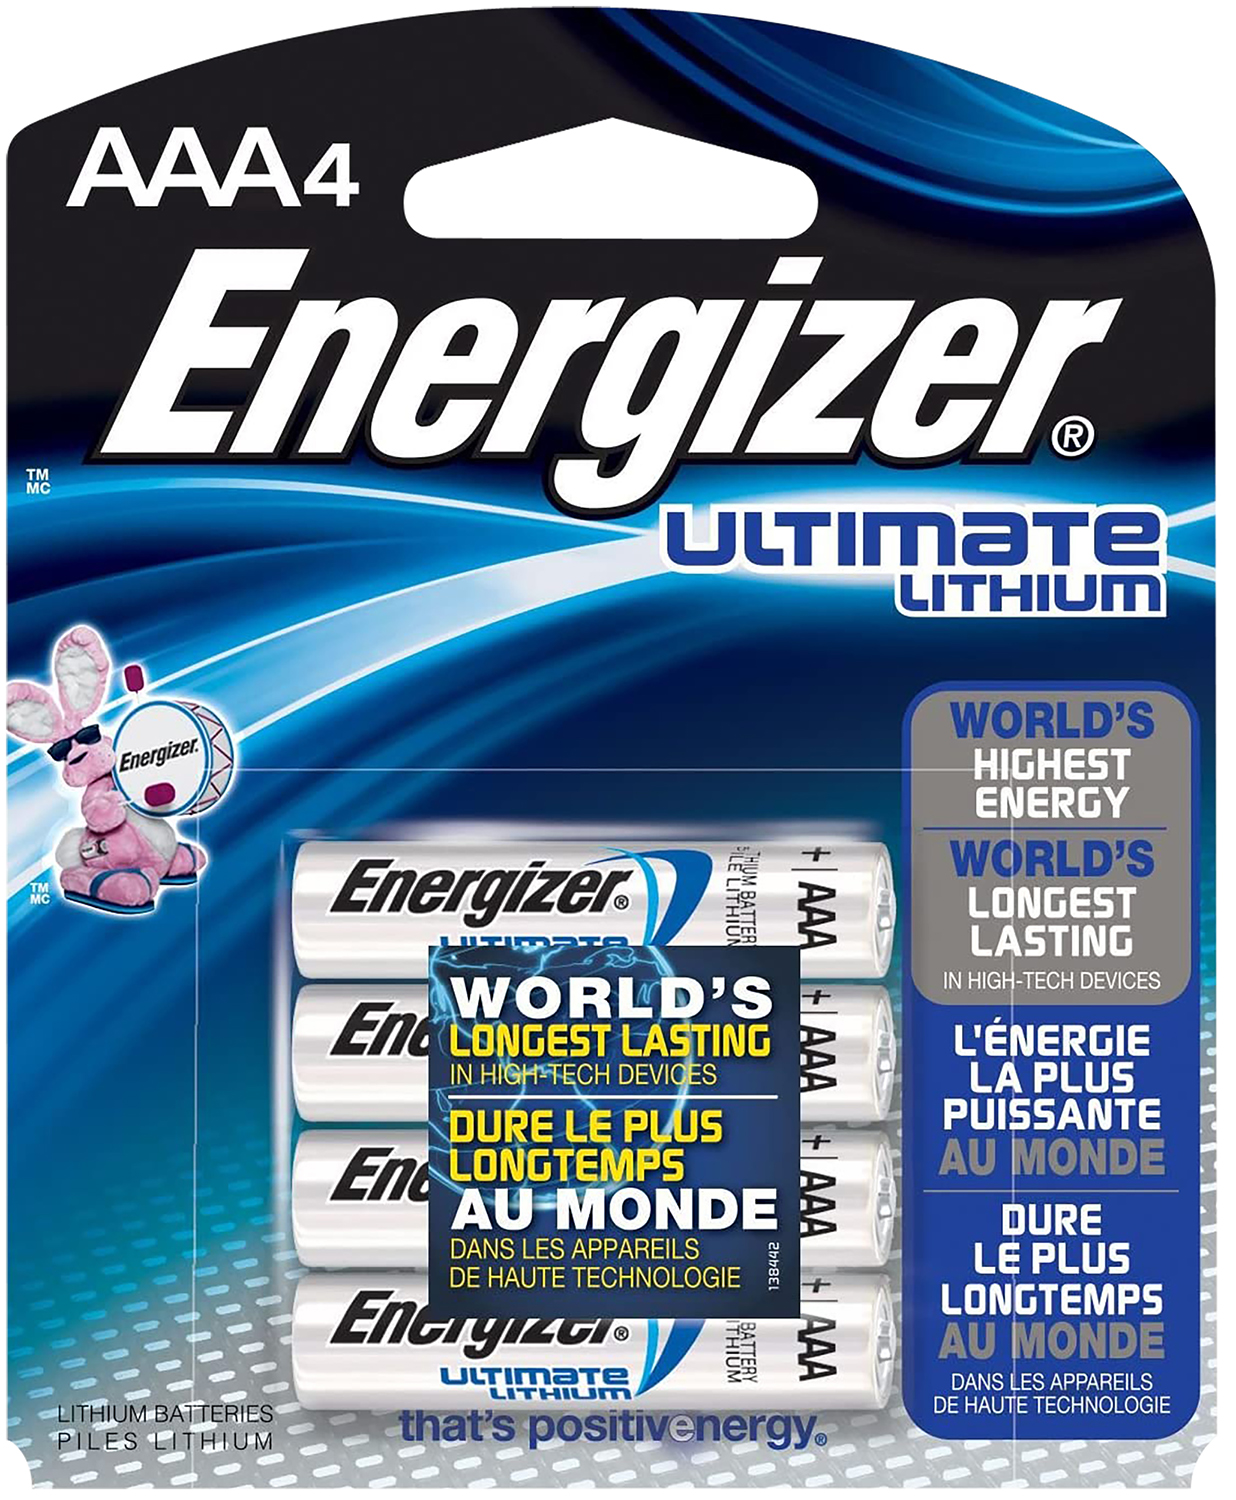 Energizer L92BBP-4.H3 AAA Ultimate Lithium 1.5 volts Lithium